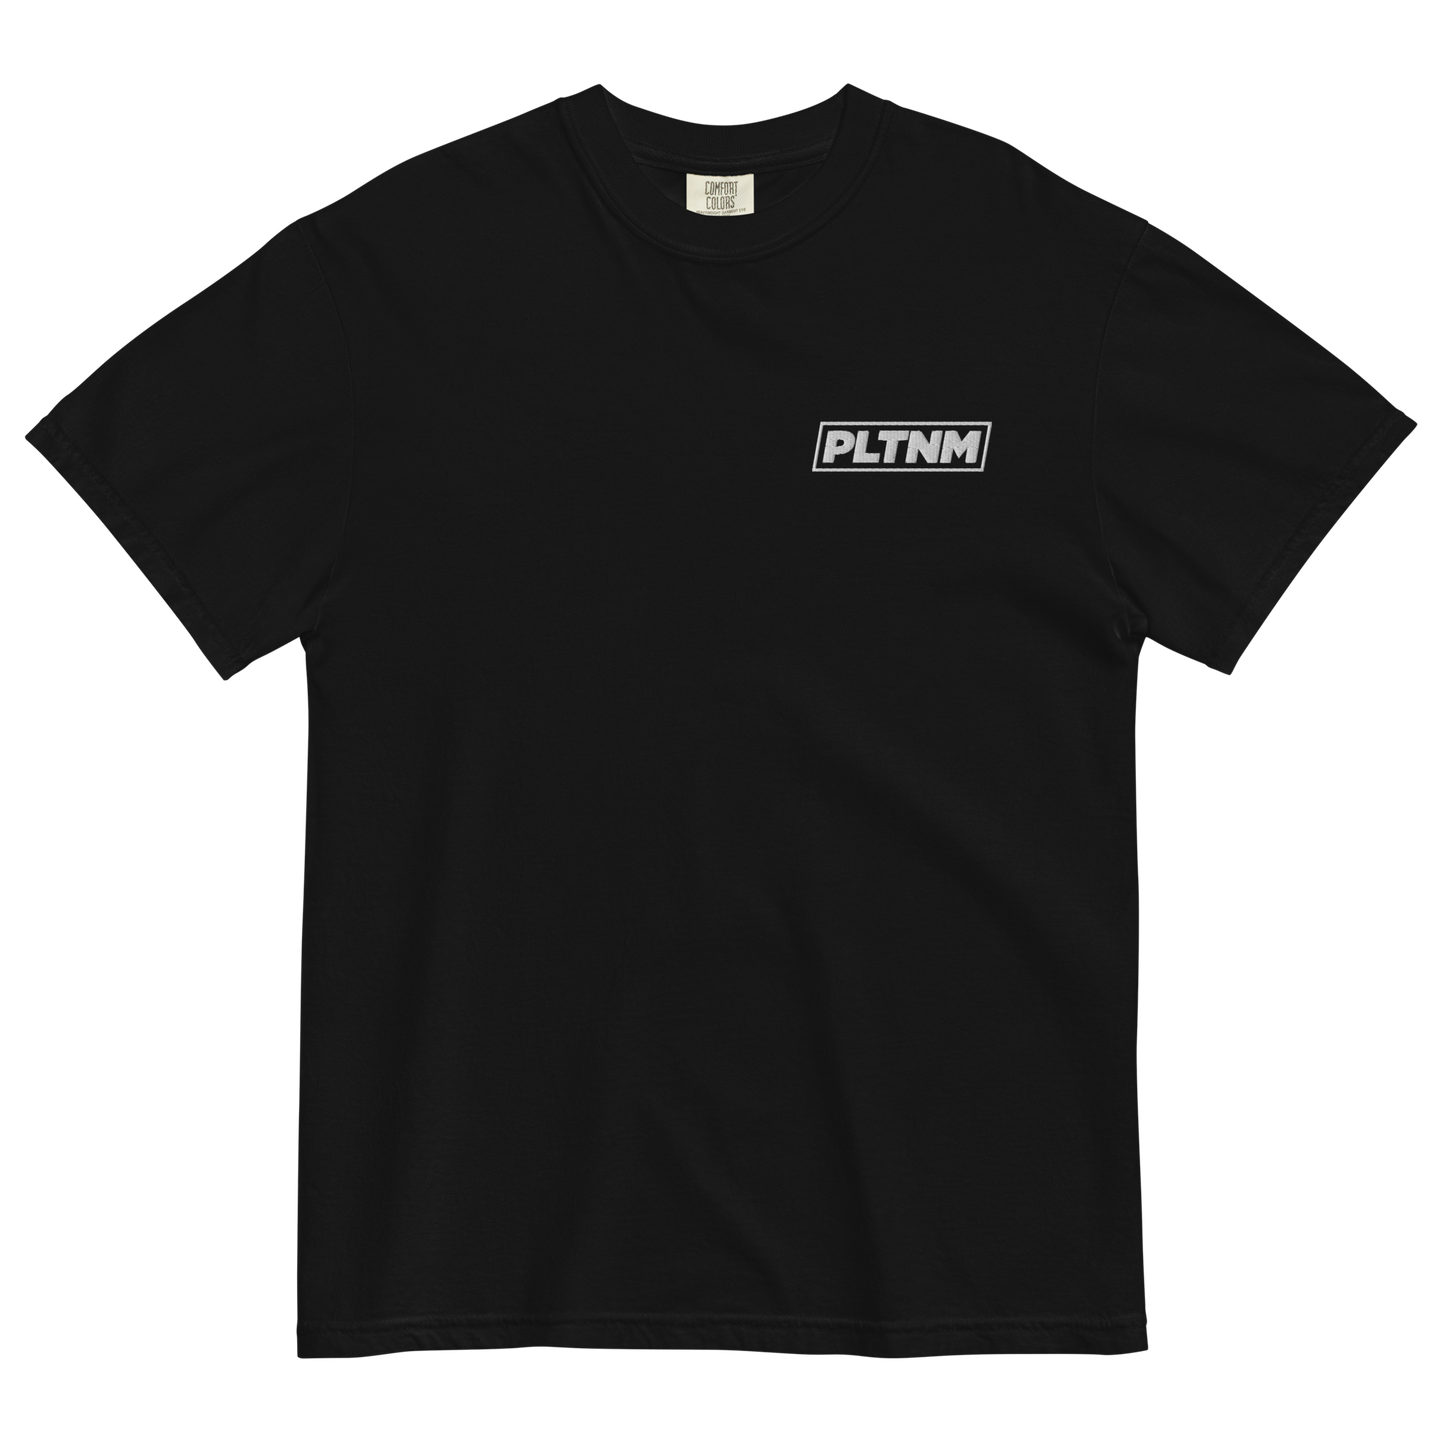 PLTNM Embroidered T-Shirt